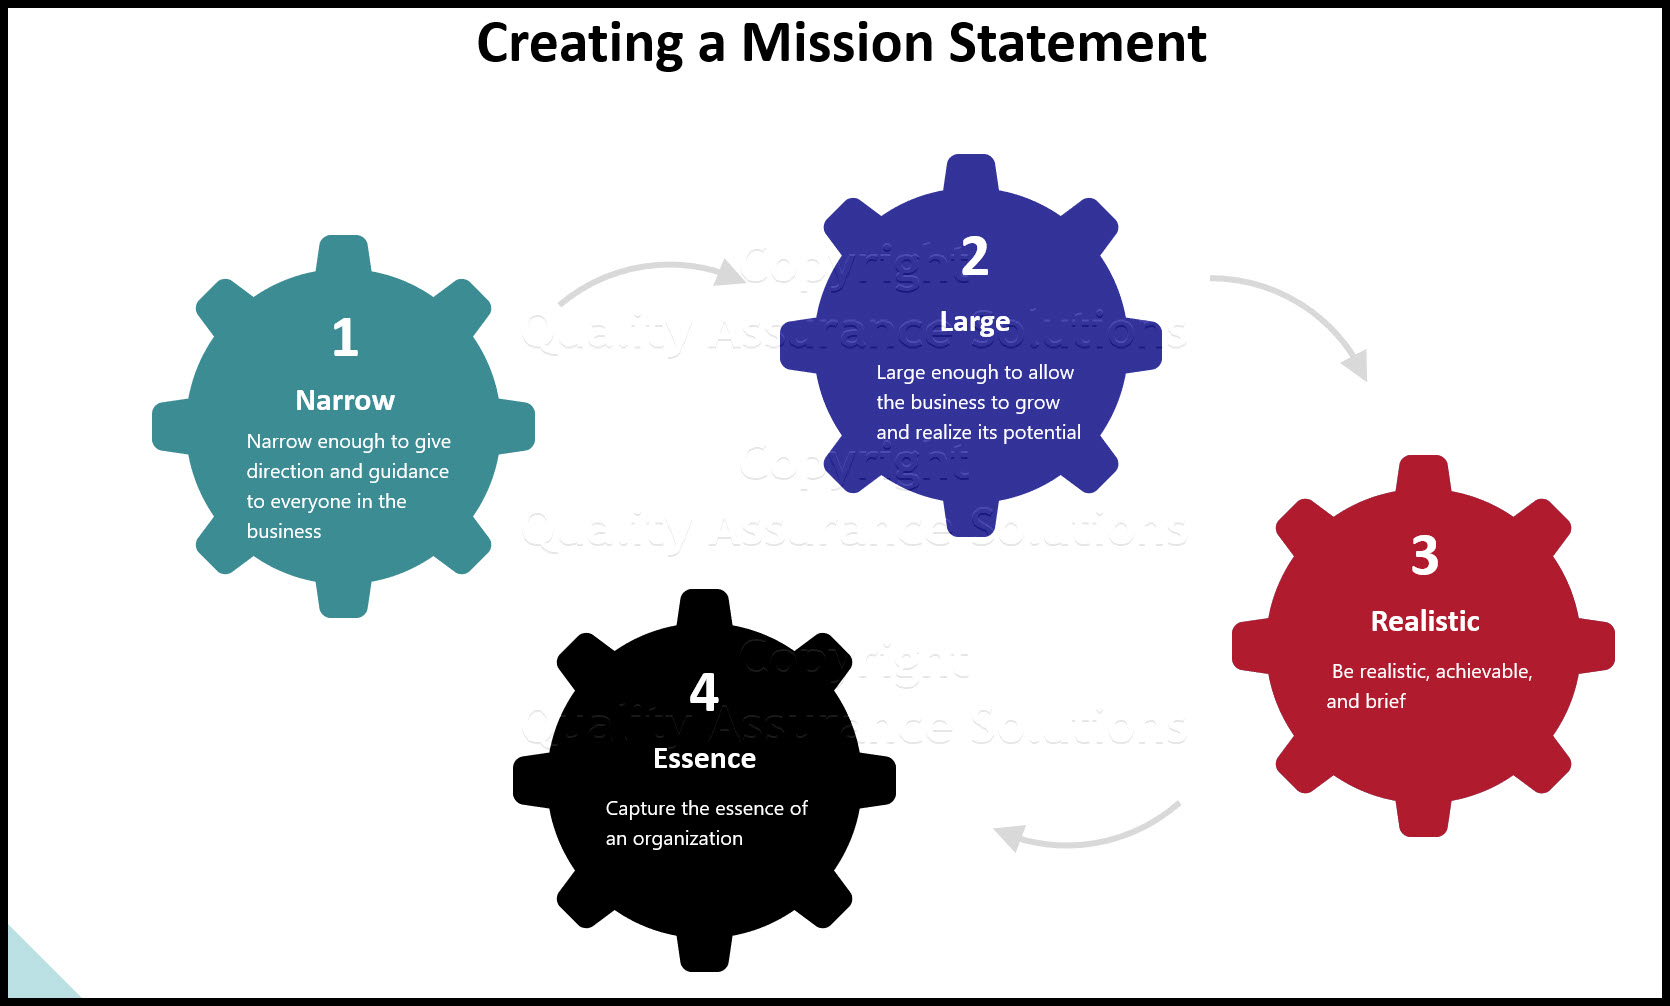 Learn to create company mission statements. Article covers benefits of well written mission statements, it defines mission statement; it covers development, questions to consider, and includes multiple samples of company mission statements.